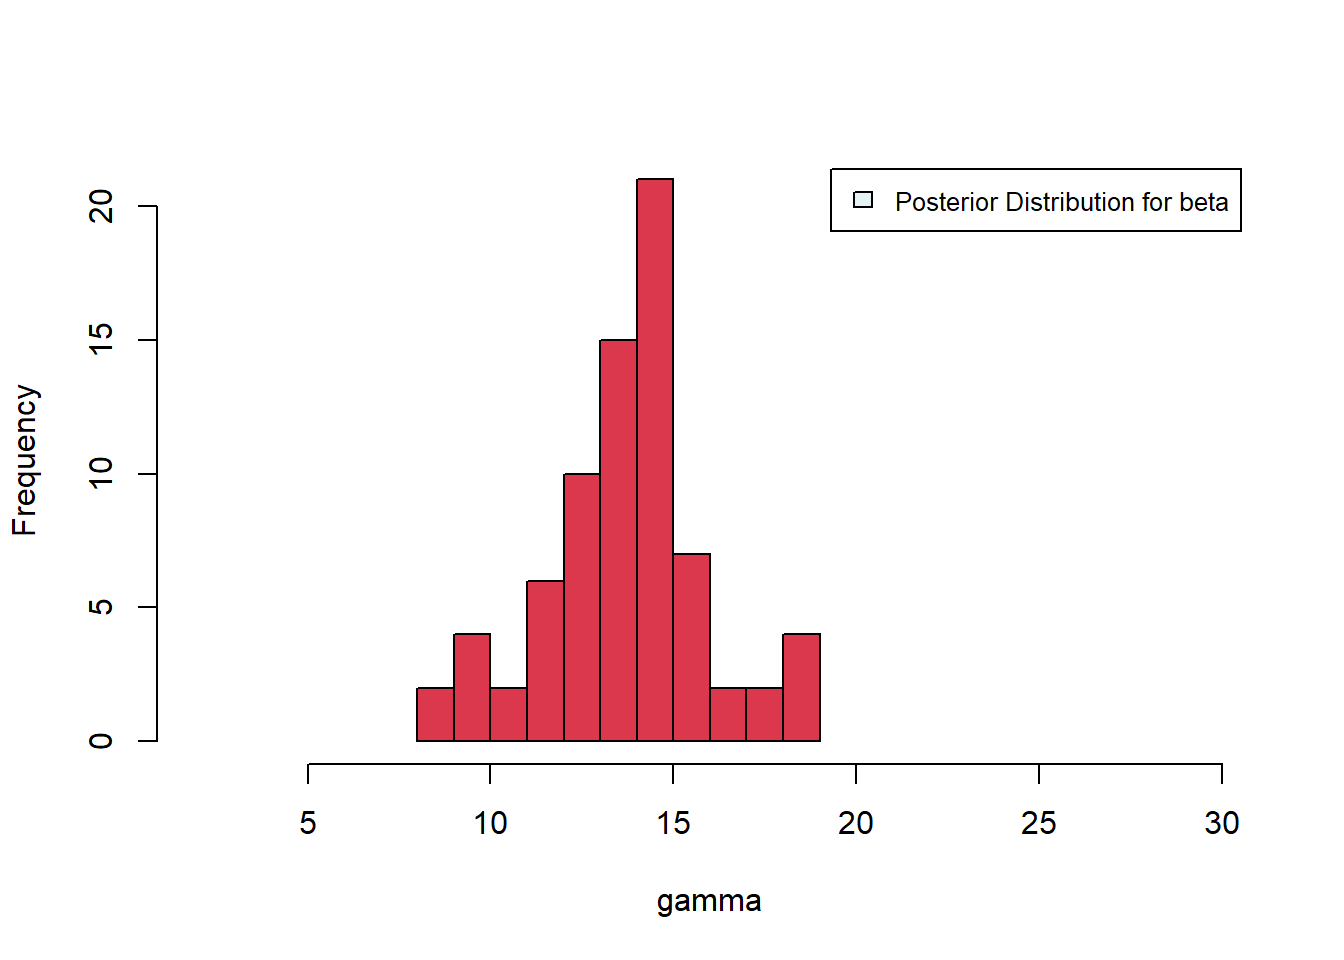 The posterior distribution for gamma shows bars to the left side of the plot. The posterior distribution for beta is more spread out towards the center, peaking in the middle.